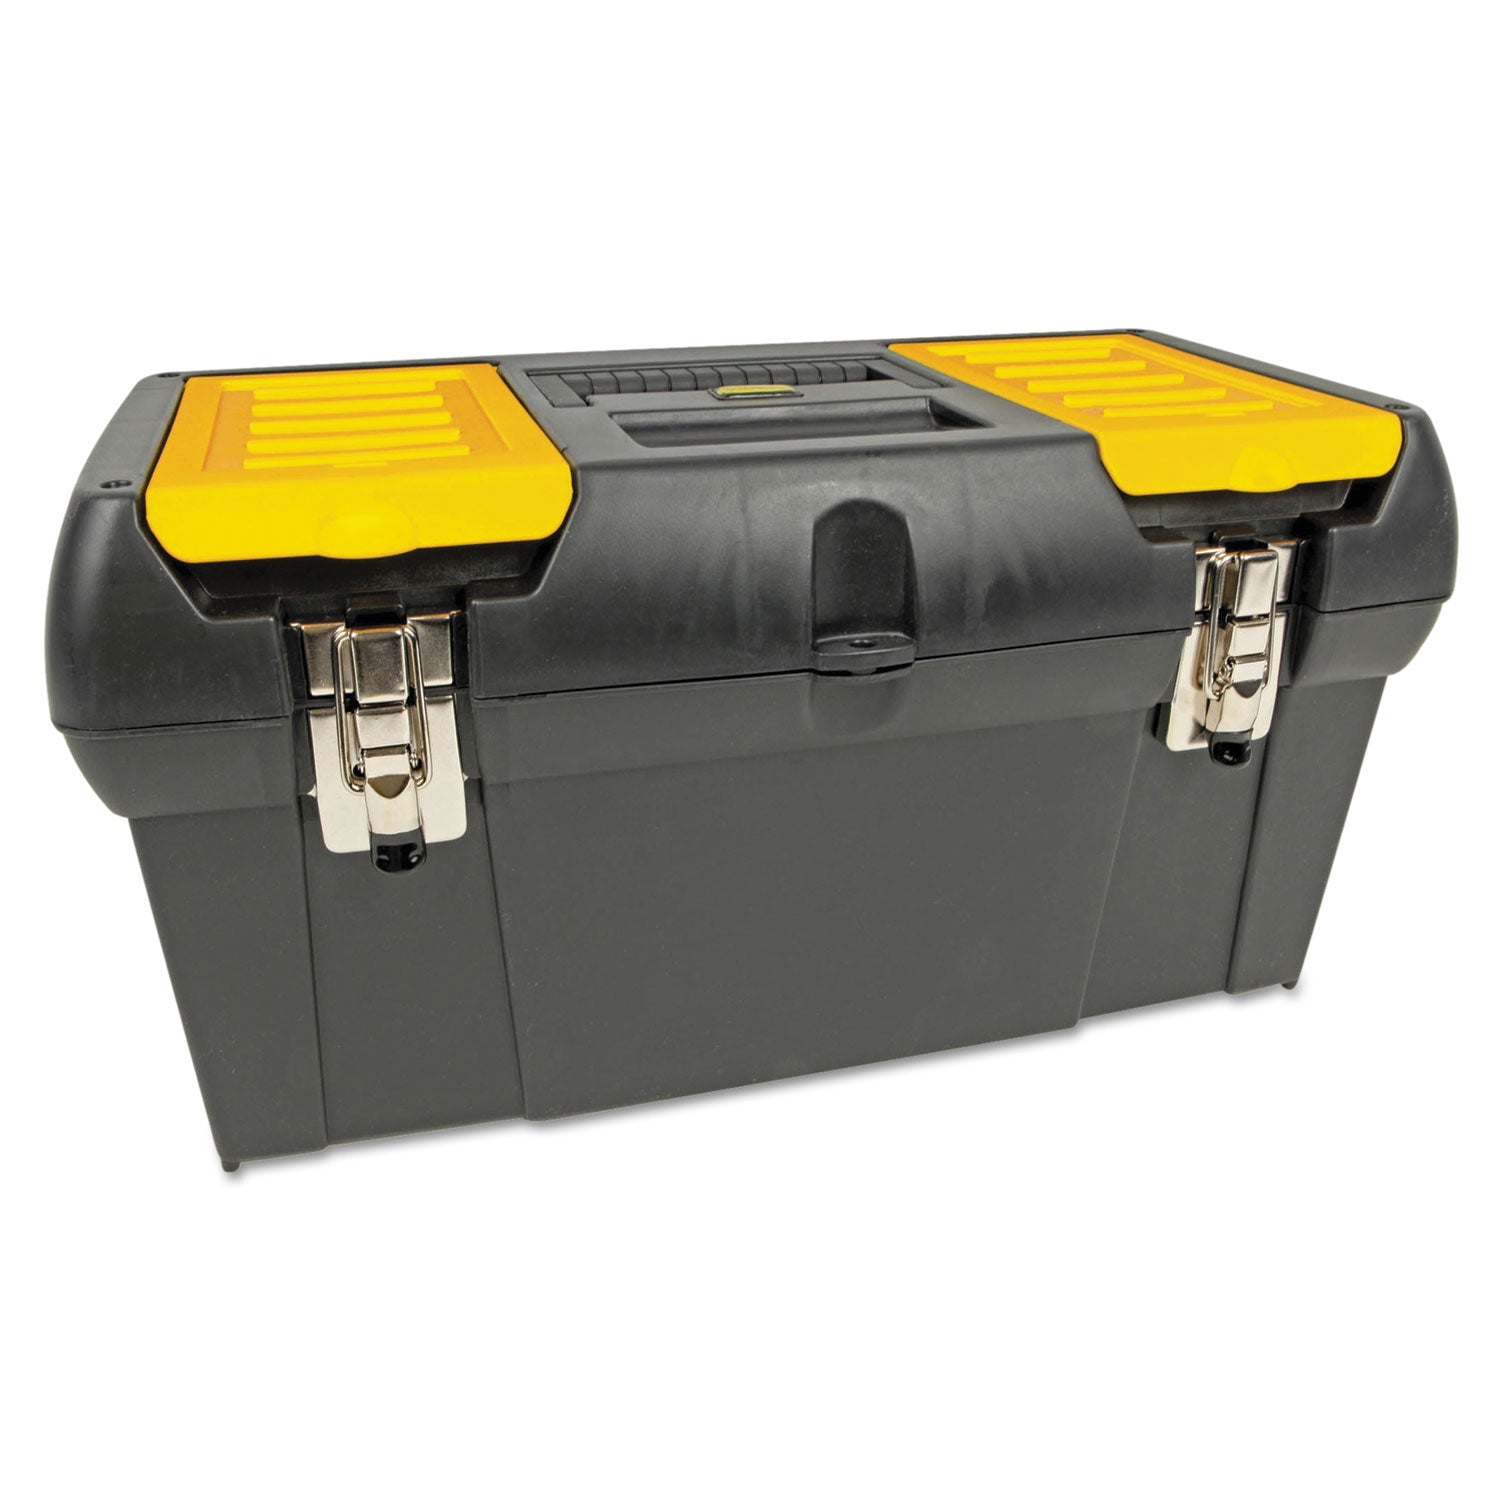 Series 2000 Toolbox w/Tray, Two Lid Compartments - 